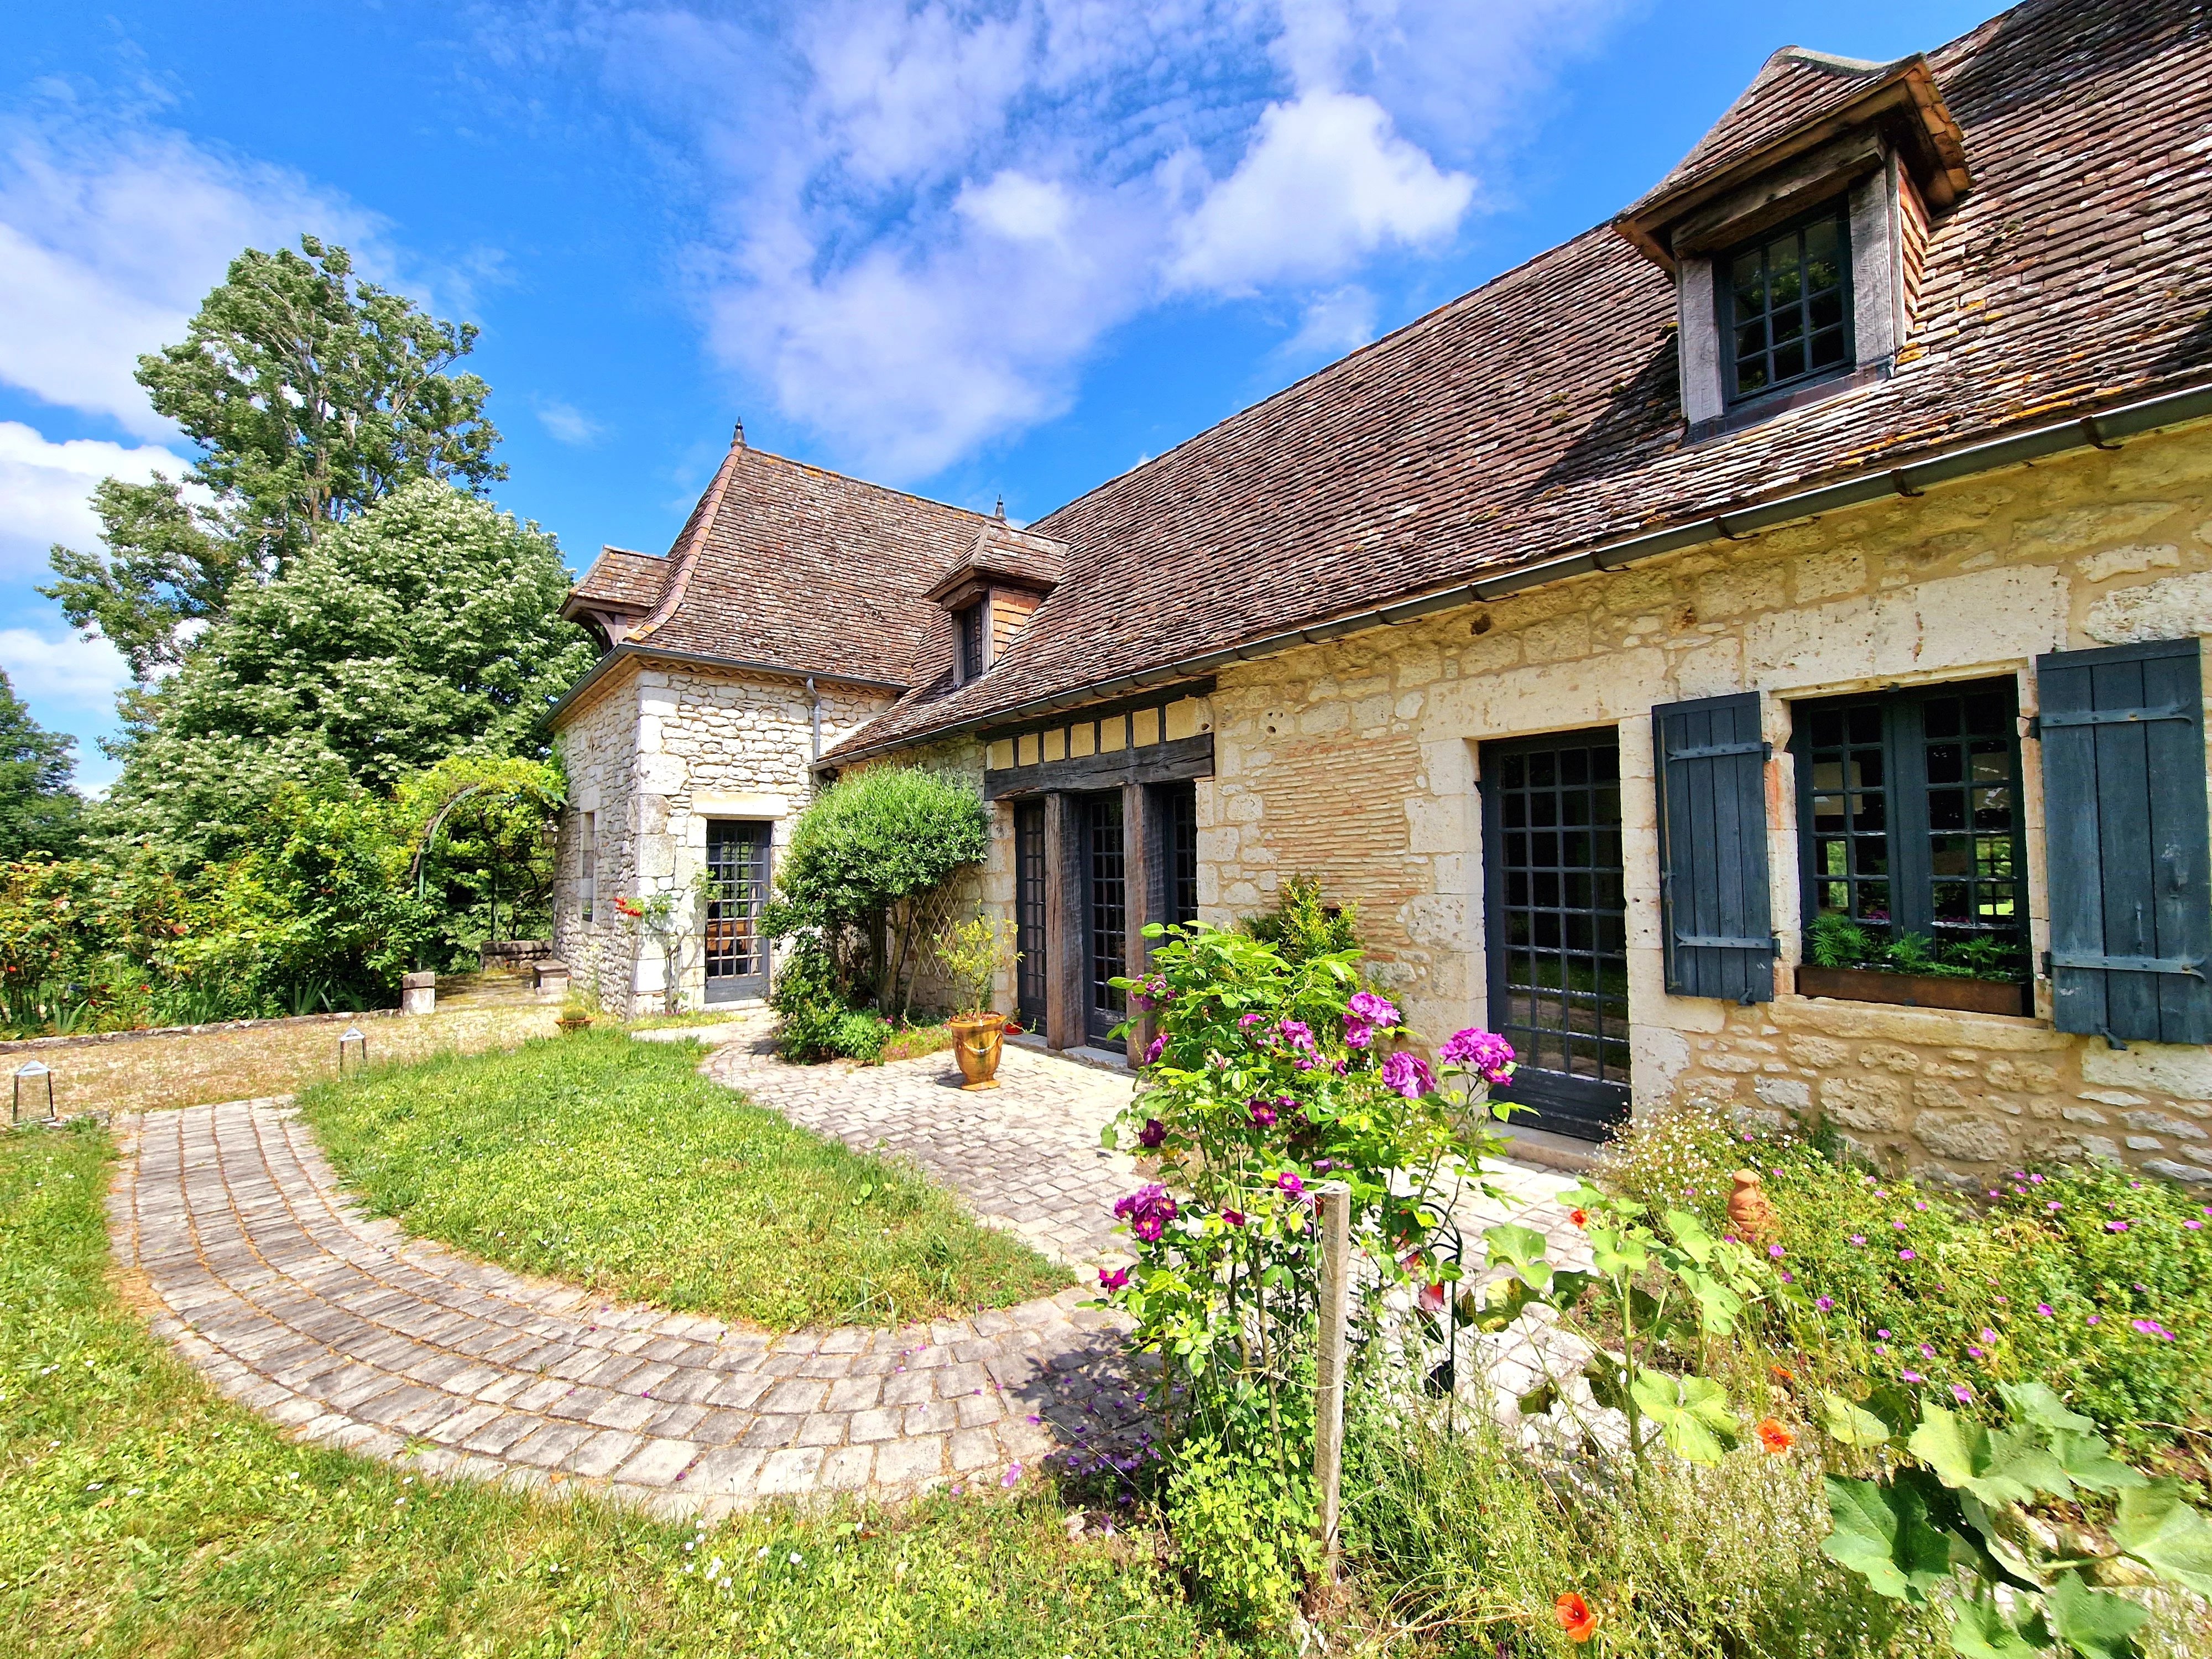 Magnificent stone ensemble with stunning gardens, lakes and views